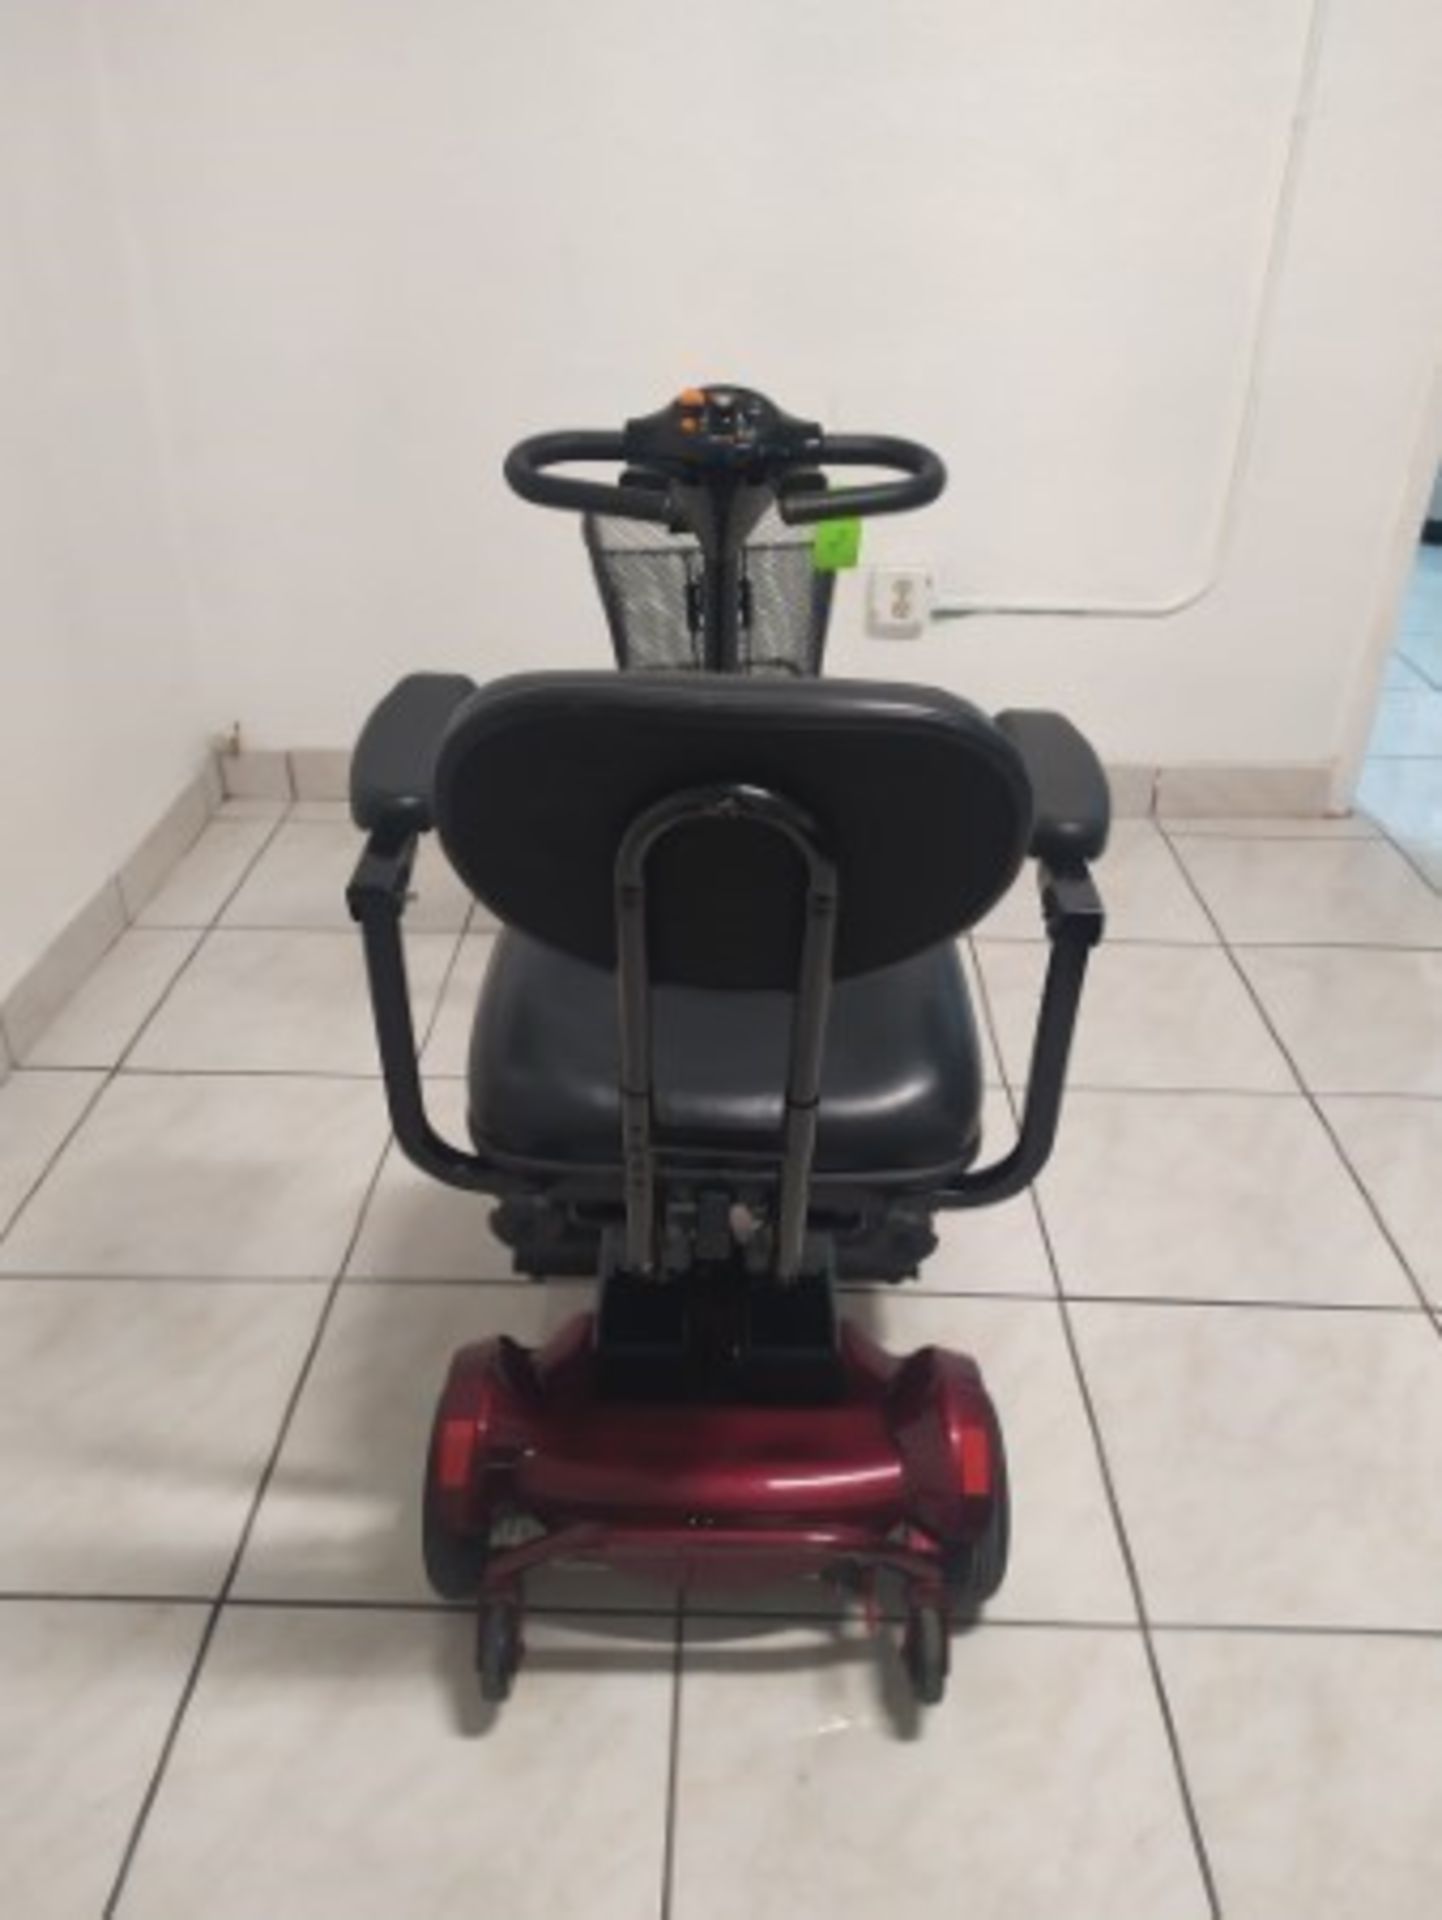 2011 DRIVE HAWK 3-WHEEL SCOOTER WITH BASKET - RED - 250LB CAPACITY - SERIAL No. 2A07090111PQ (NO CHA - Image 3 of 6